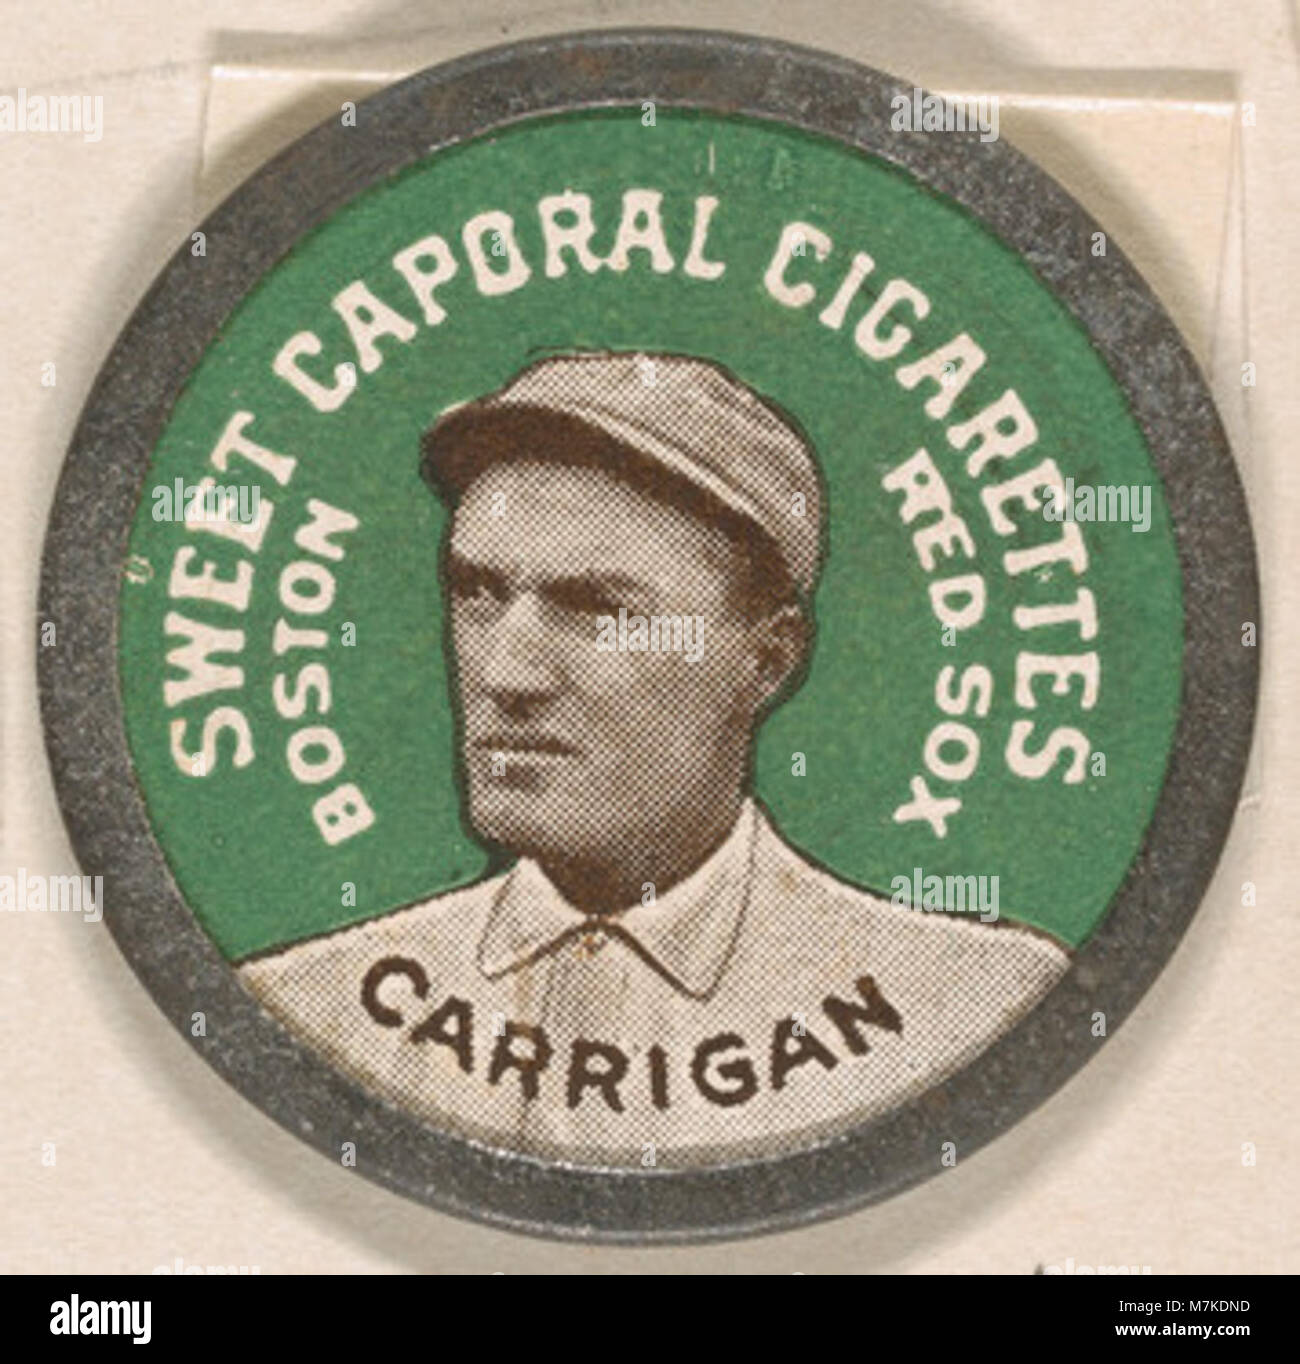 Carrigan, Boston Red Sox (green), from the Domino Discs series (PX7), issued by Kinney Brothers MET DP869242 Stock Photo